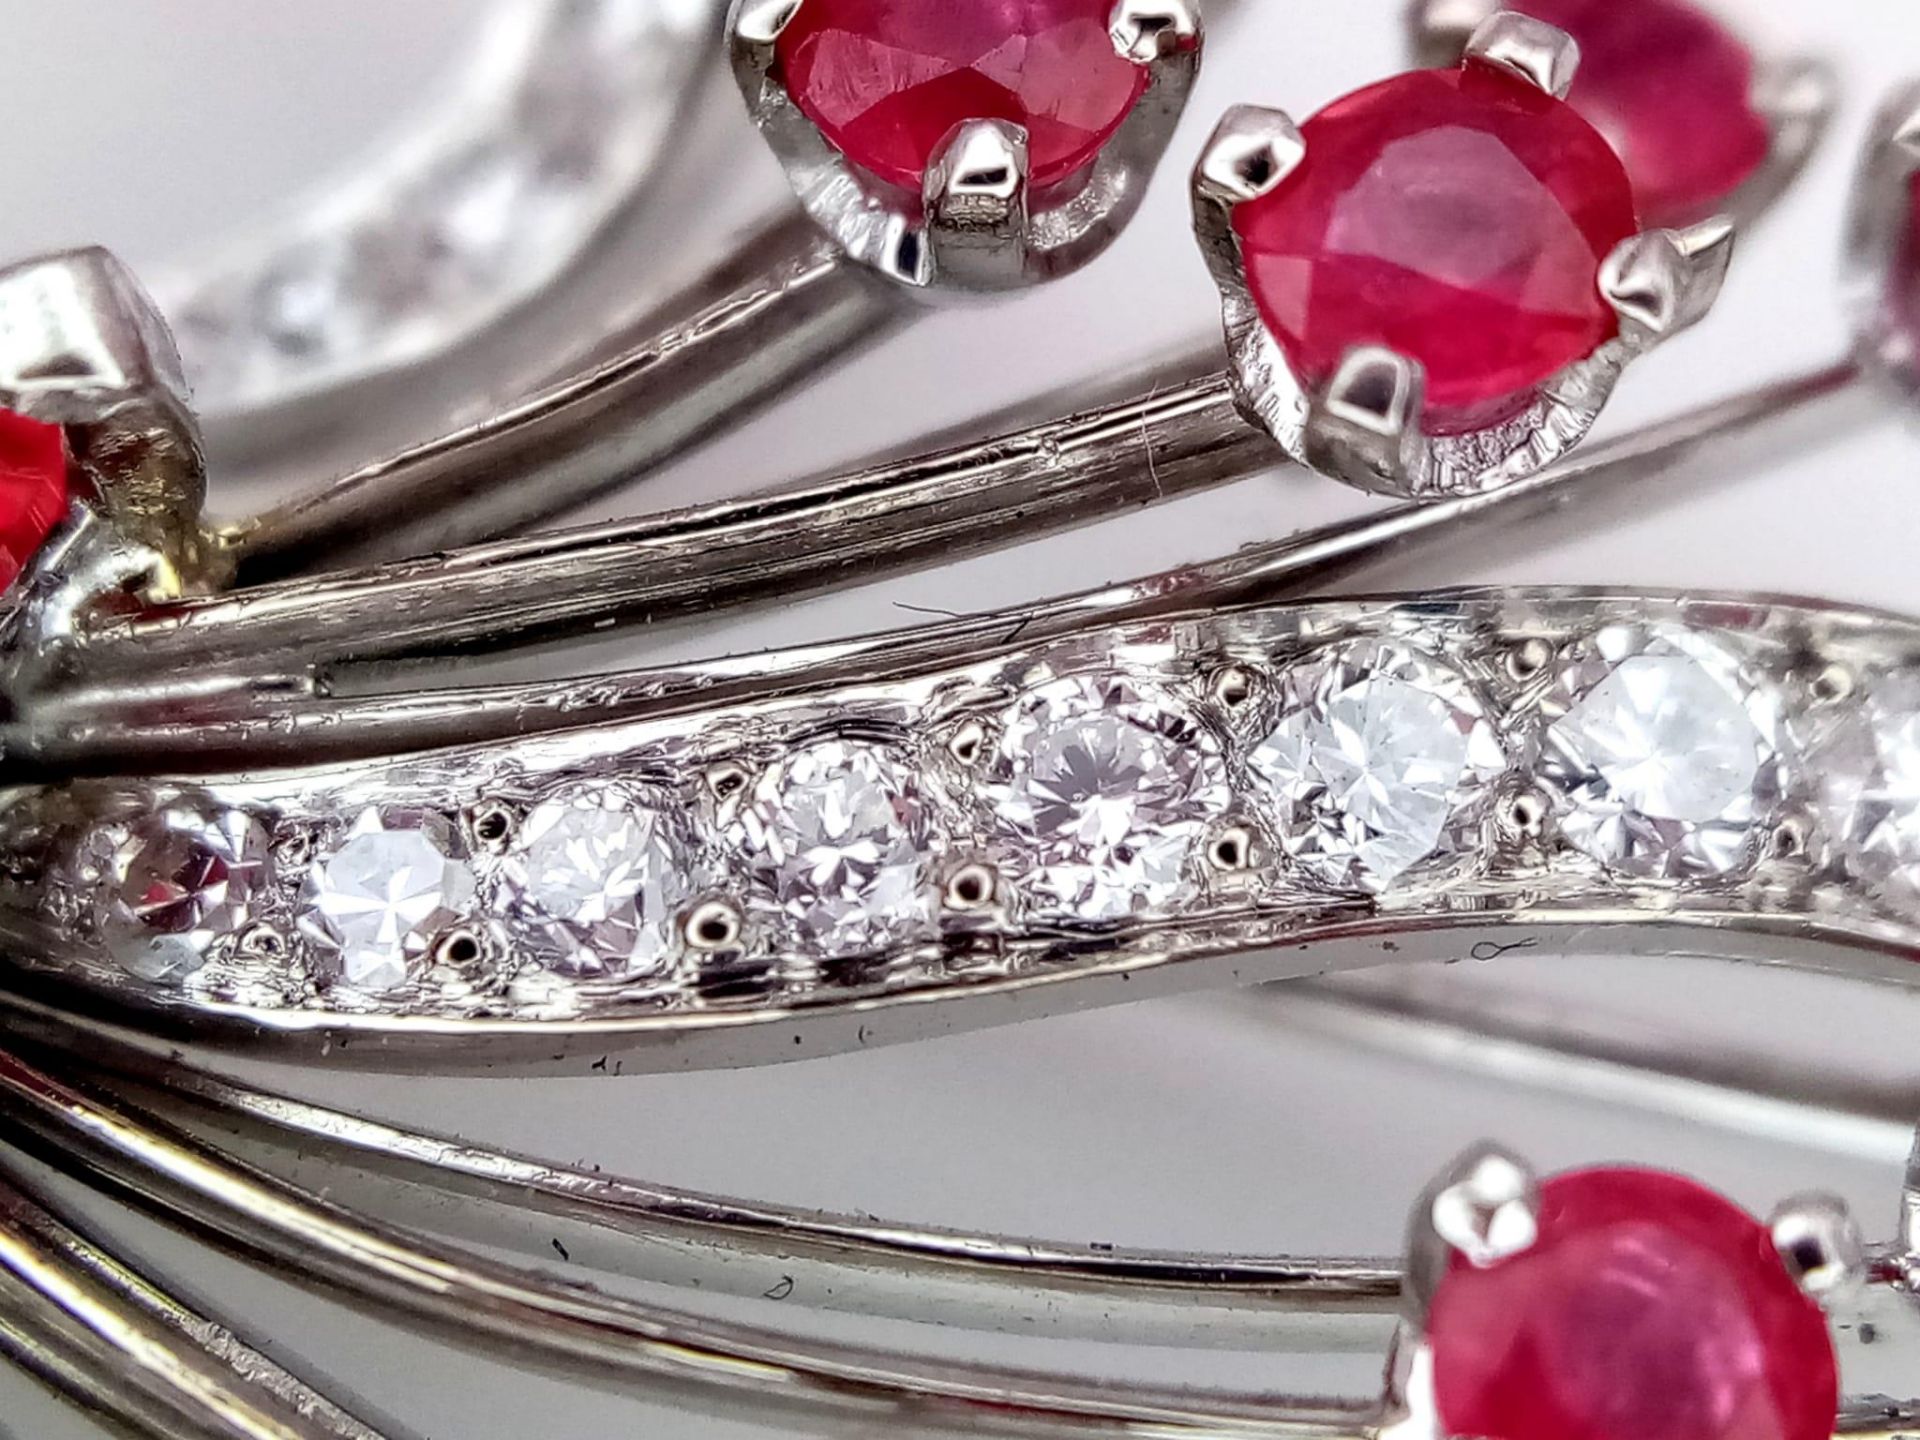 A STUNNING DIAMOND AND RUBY BROOCH SET IN PLATINUM , A MAJESTIC SPRAY OF RUBIES EMINATING FROM A - Image 5 of 7